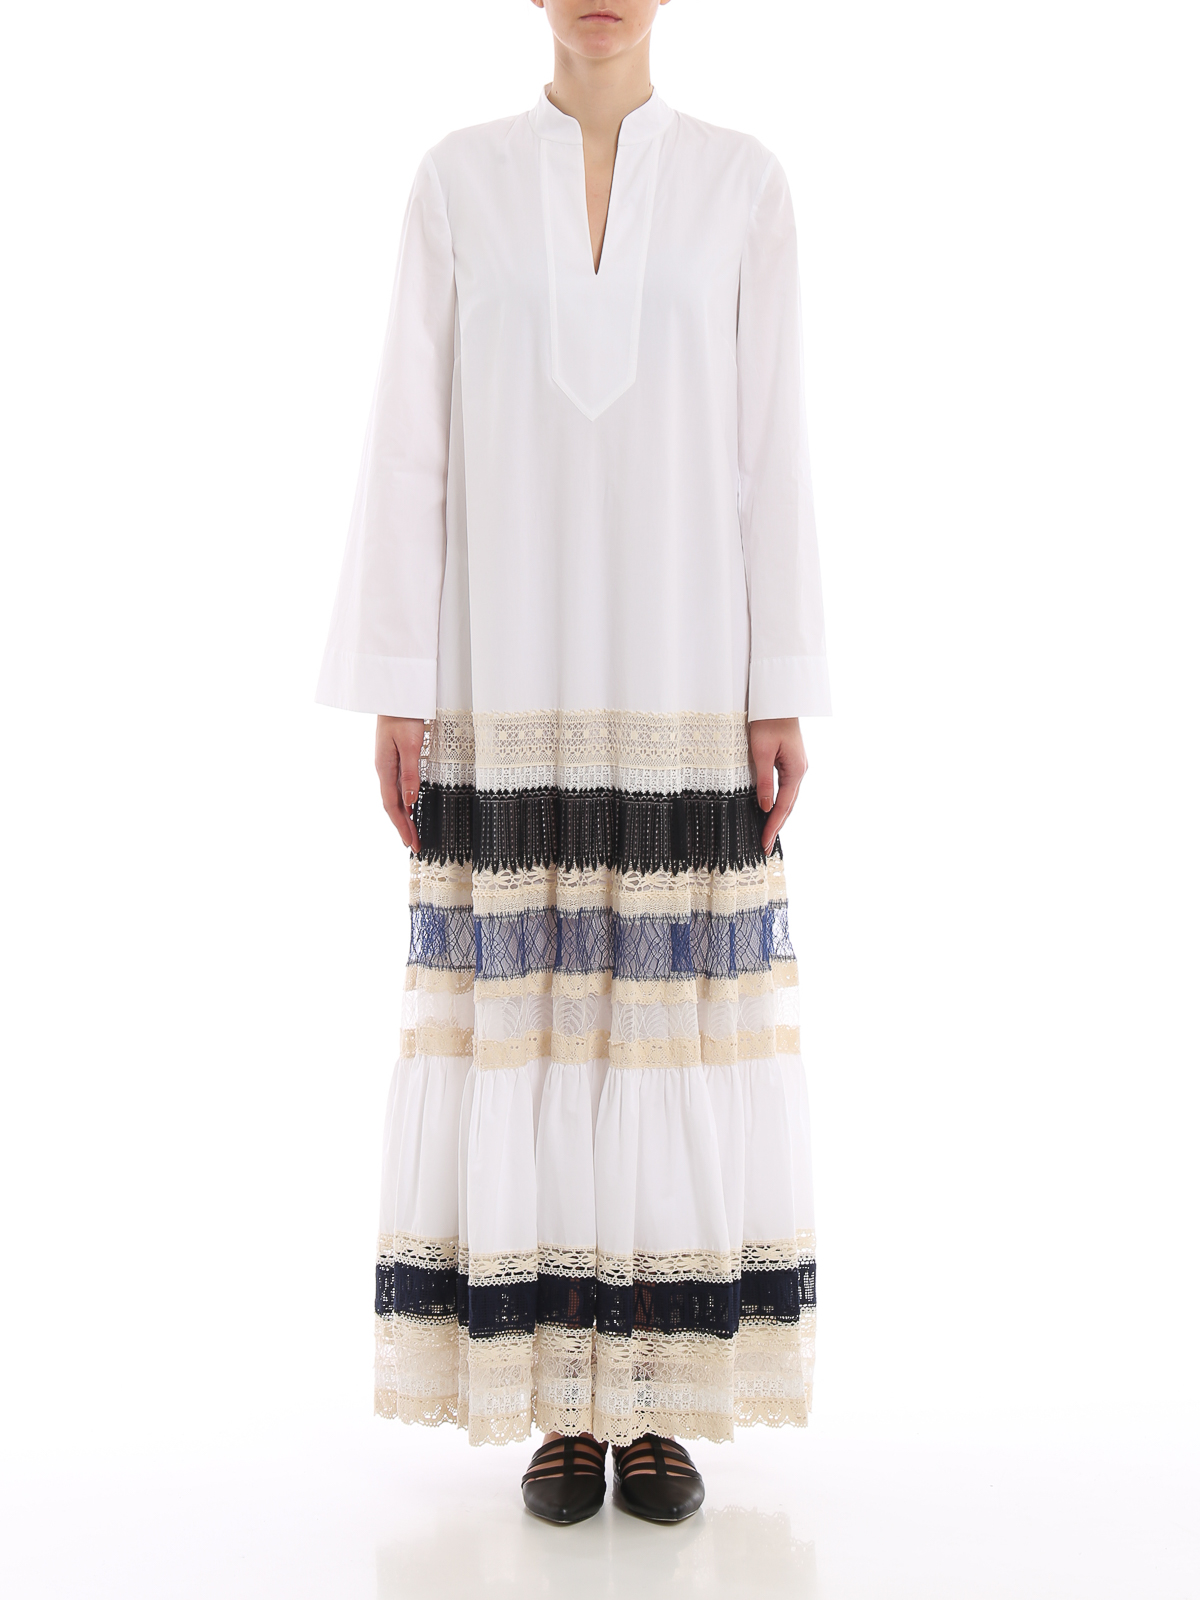 Maxi dresses Tory Burch - Lace trimmed caftan style maxi dress - 54016100